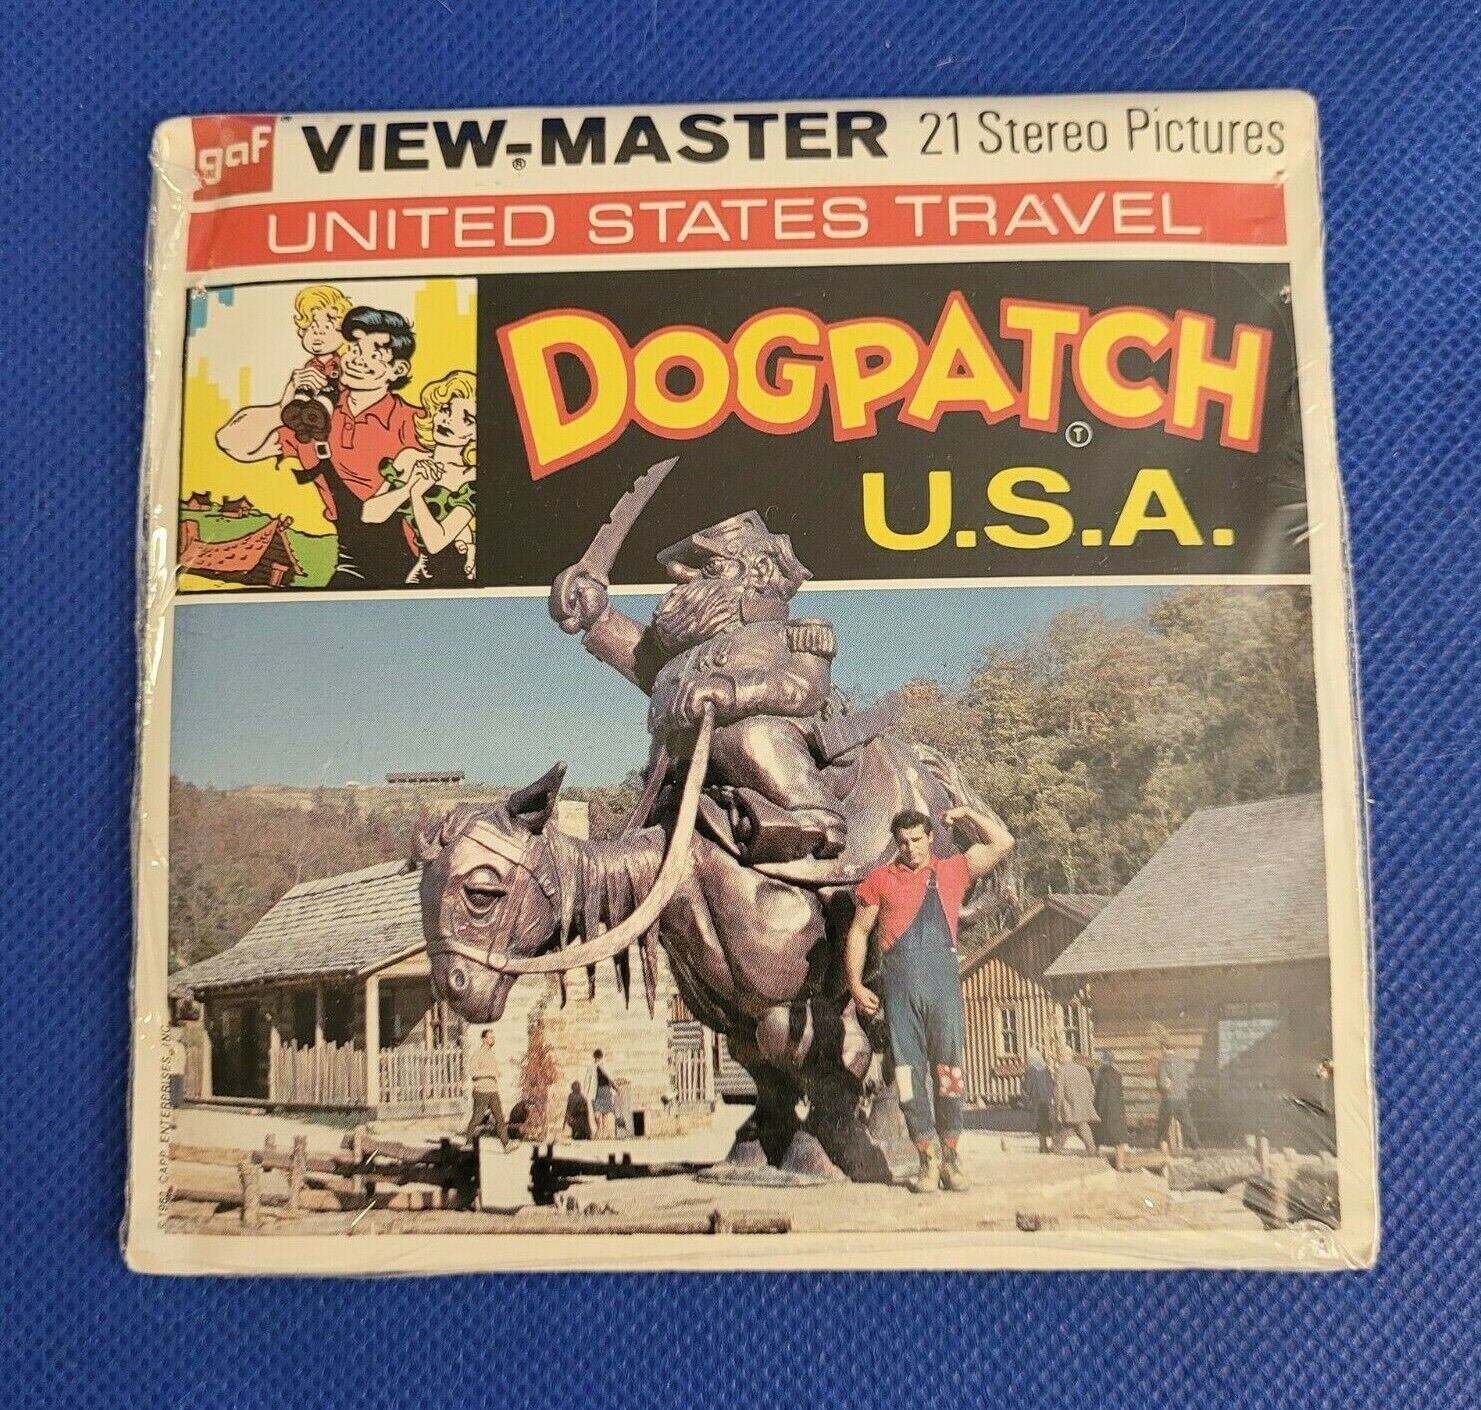 SEALED Gaf A442 Dogpatch Dog Patch USA Marble Falls AR view-master Reels Packet